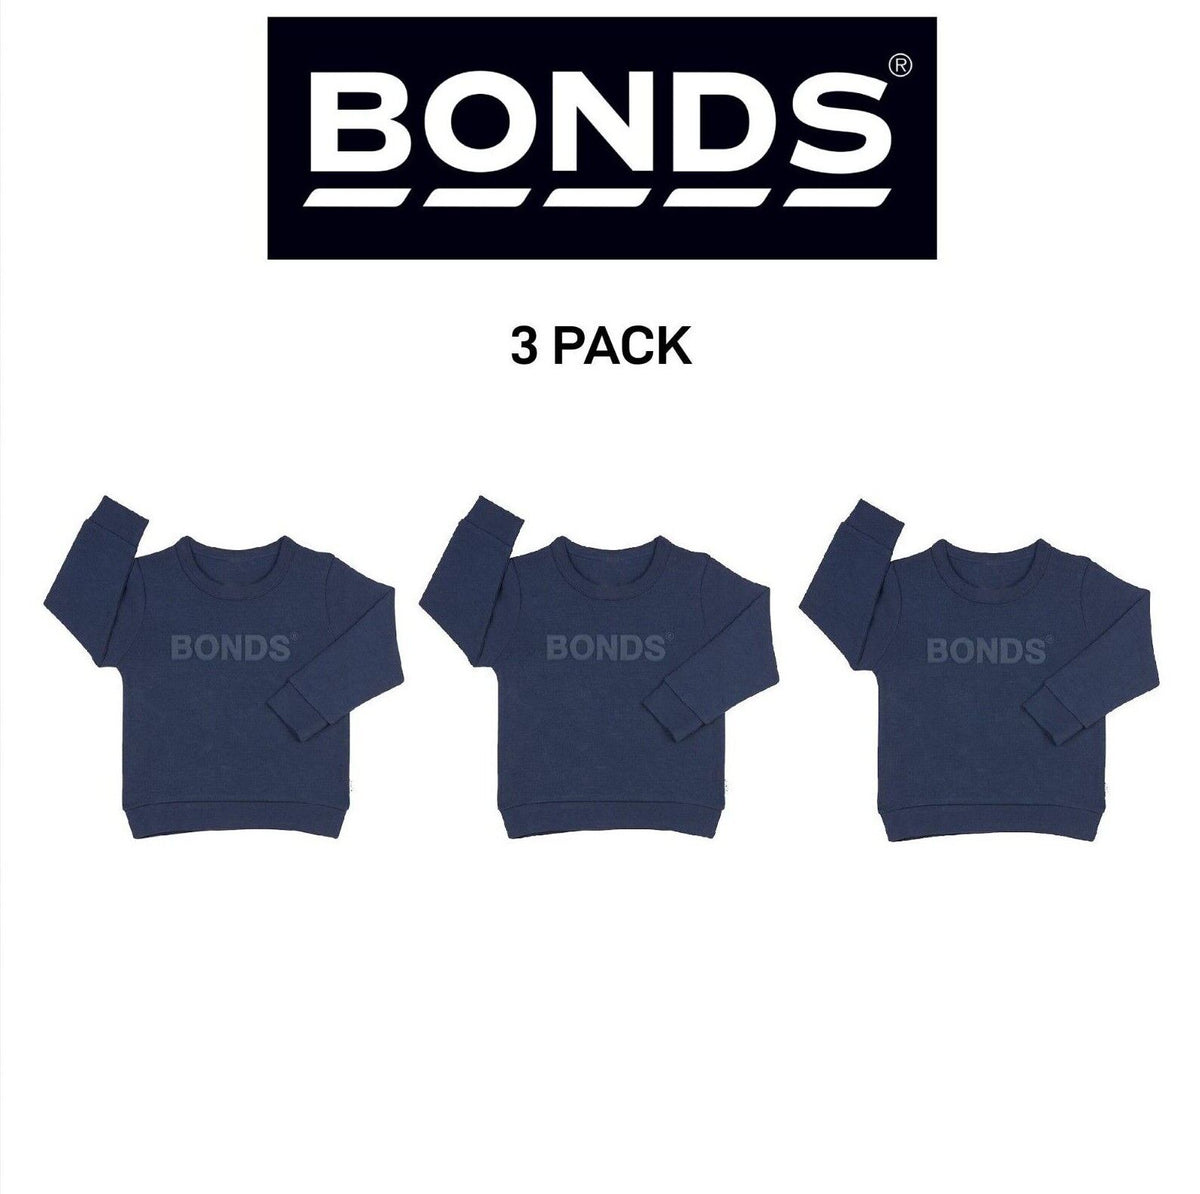 Bonds Baby Tech Sweats Pullover Ultimate Warm Comfort Sporty Style 3 Pack KVQTA